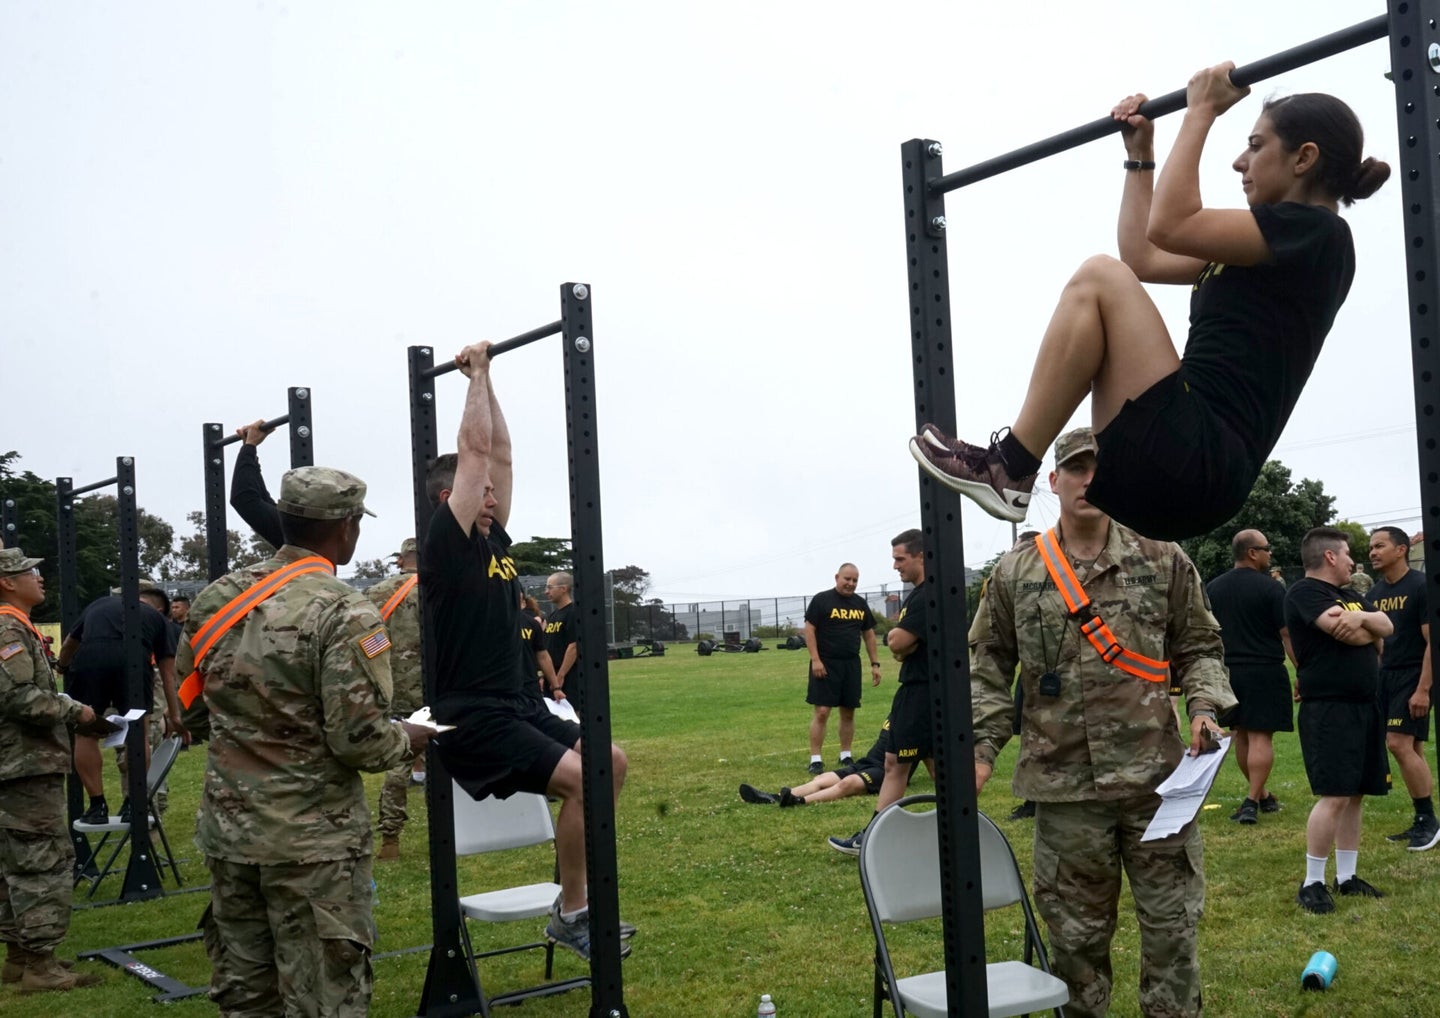 Spc. Melisa G. Flores, a paralegal specialist with the 223rd Military Intelligence Battalion, performs a leg-tuck during an Army Combat Physical Fitness test hosted at Abraham Lincoln High School in San Francisco, California, July 21, 2019. Flores, who has competed in the Best Warrior competition and won recognition for fitness, said the ACFT has challenged her in new ways.  (U.S. Army National Guard photo by Spc. Amy Carle)